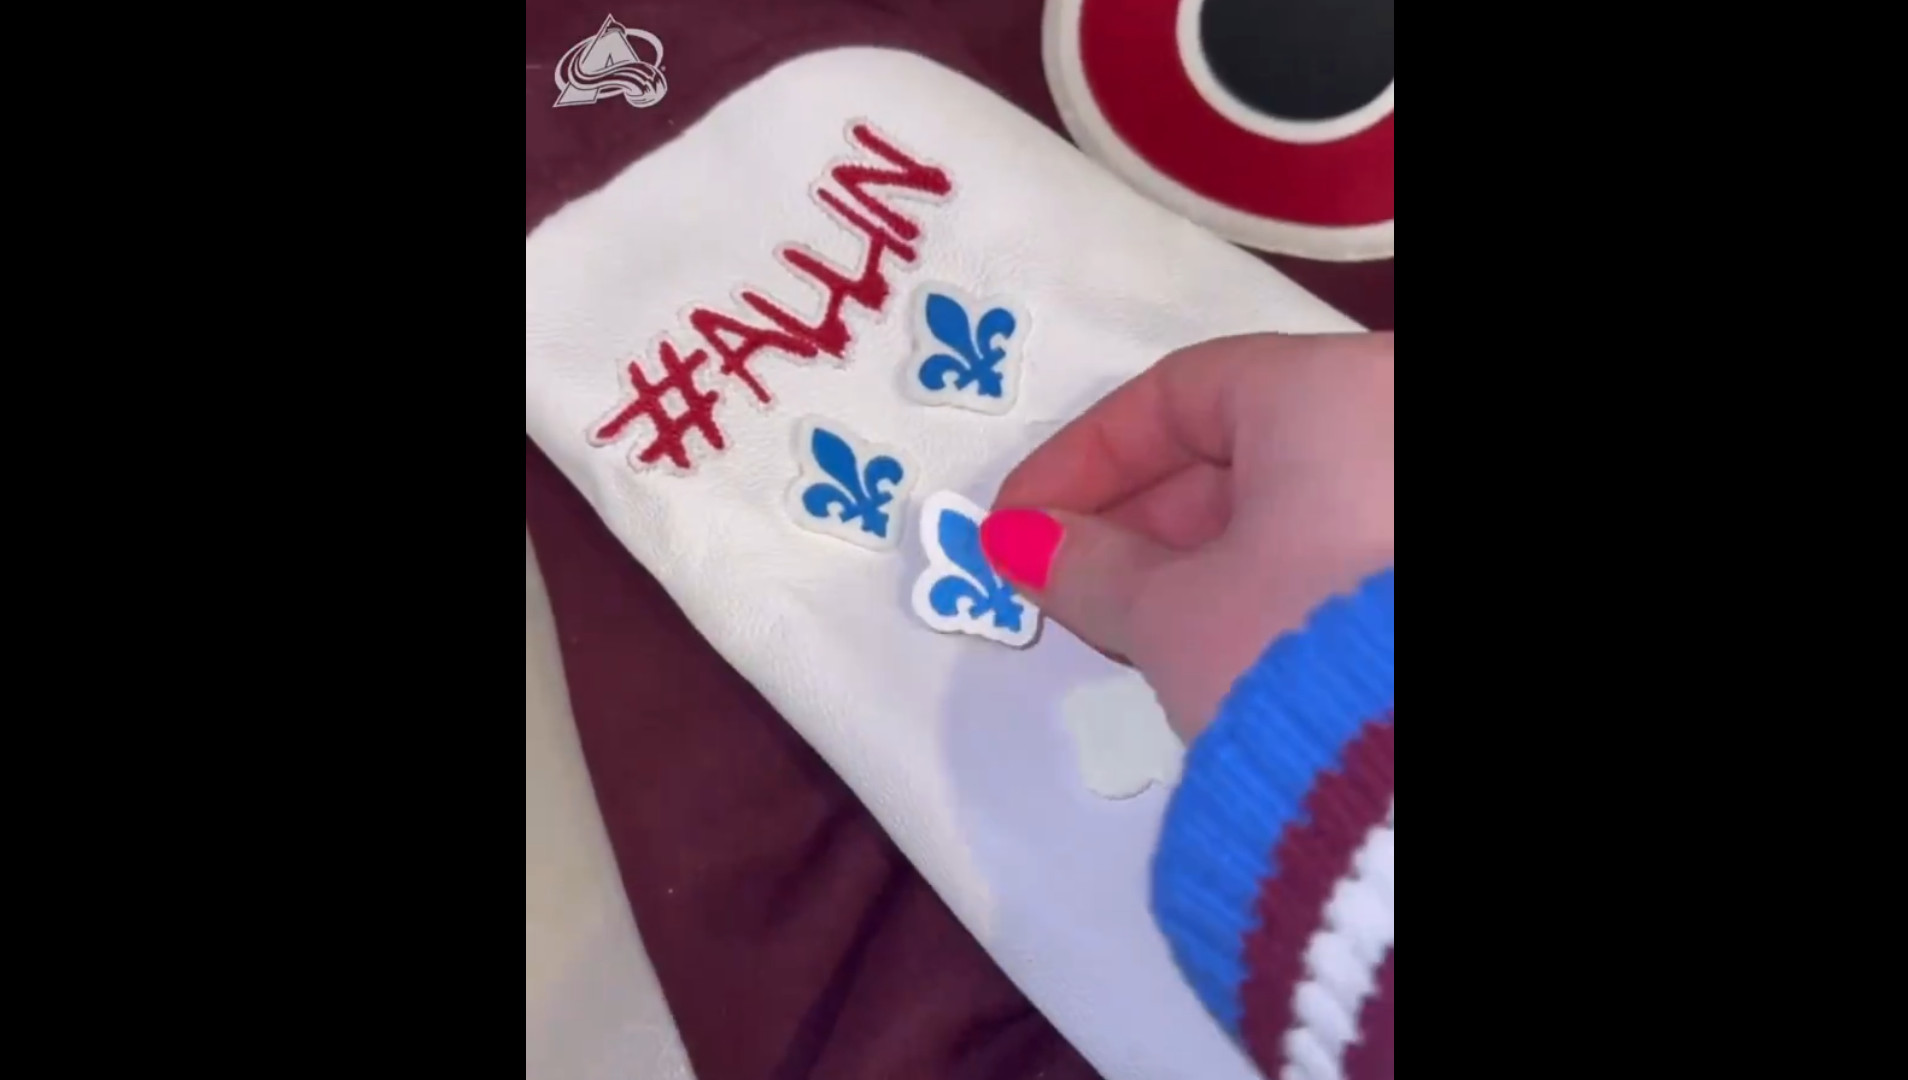 The Avalanche honors the Nordiques even in the playoffs